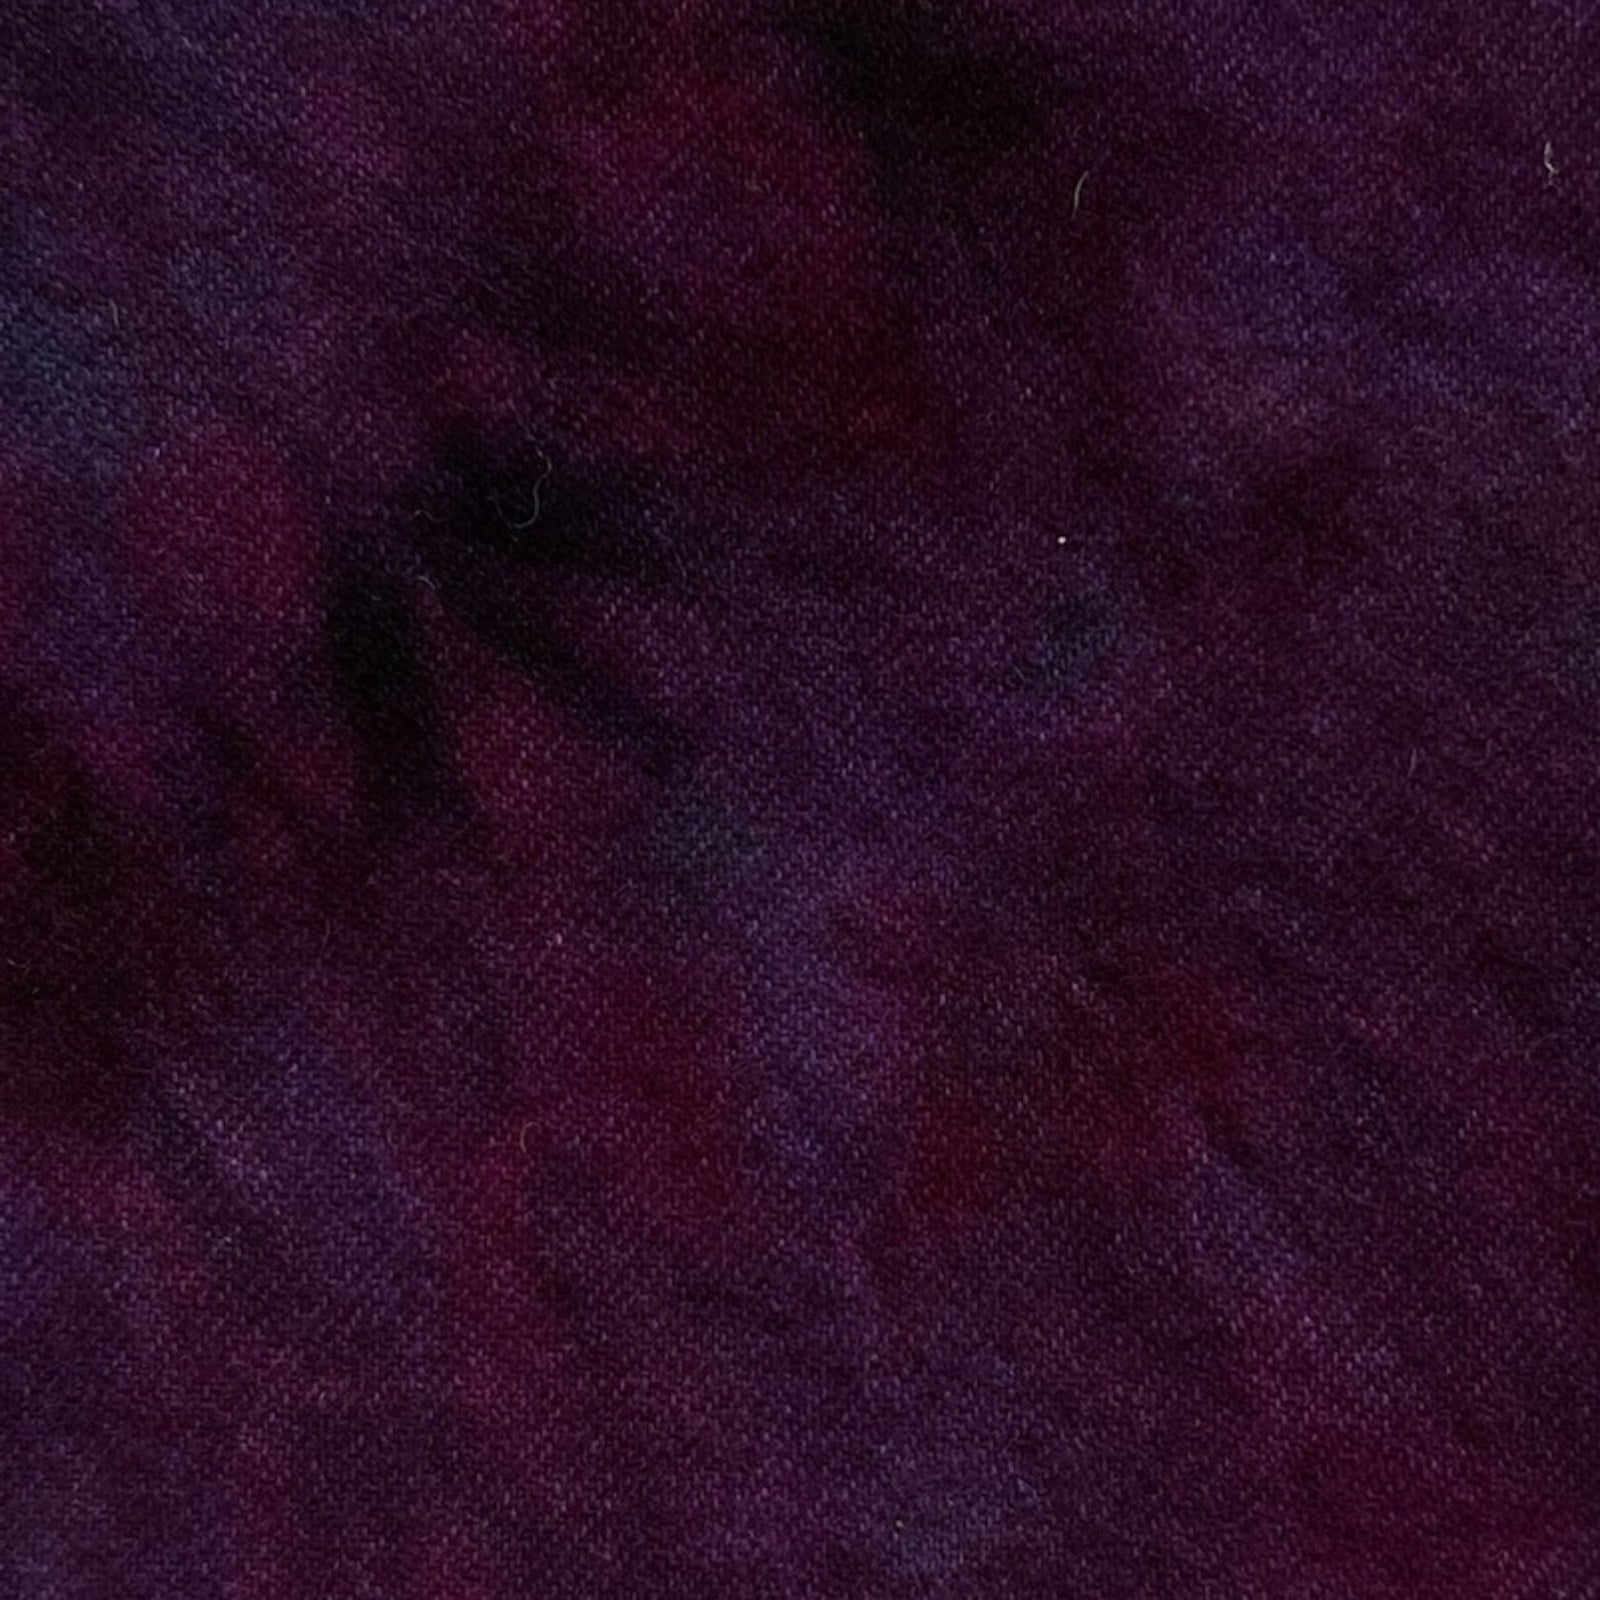 Wow - Dark - Colorama Hand Dyed Wool - Offered by HoneyBee Hive Rug Hooking